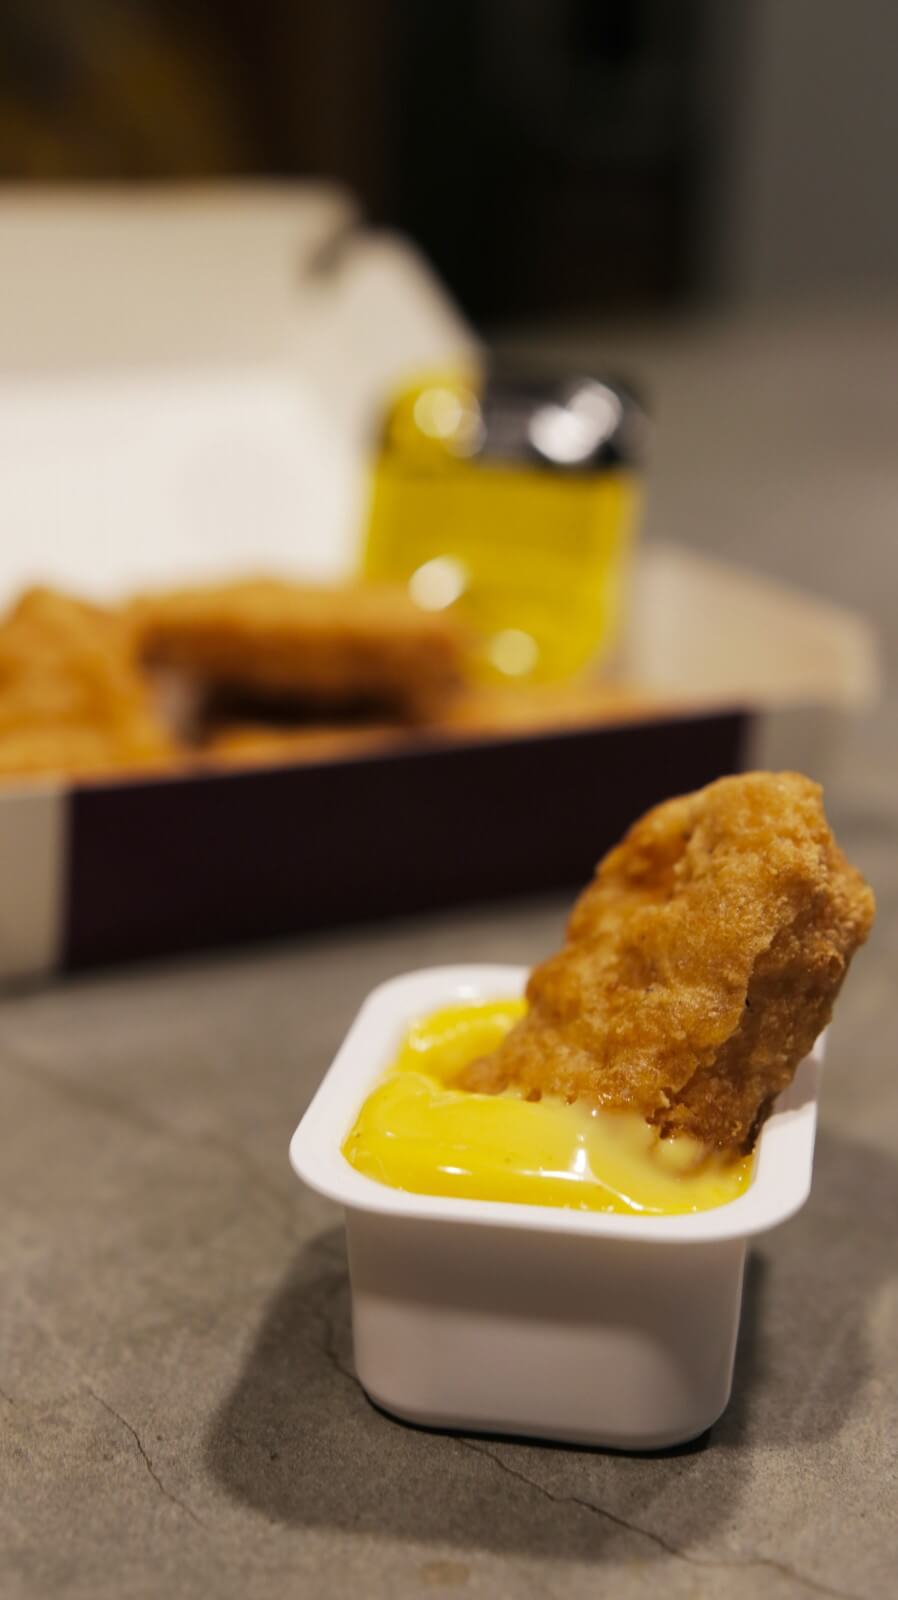 We Tried McDonald's New Salted Egg Yolk McNuggets Sauce and Loaded Fries, and Here's The Load-Down - WORLD OF BUZZ 1